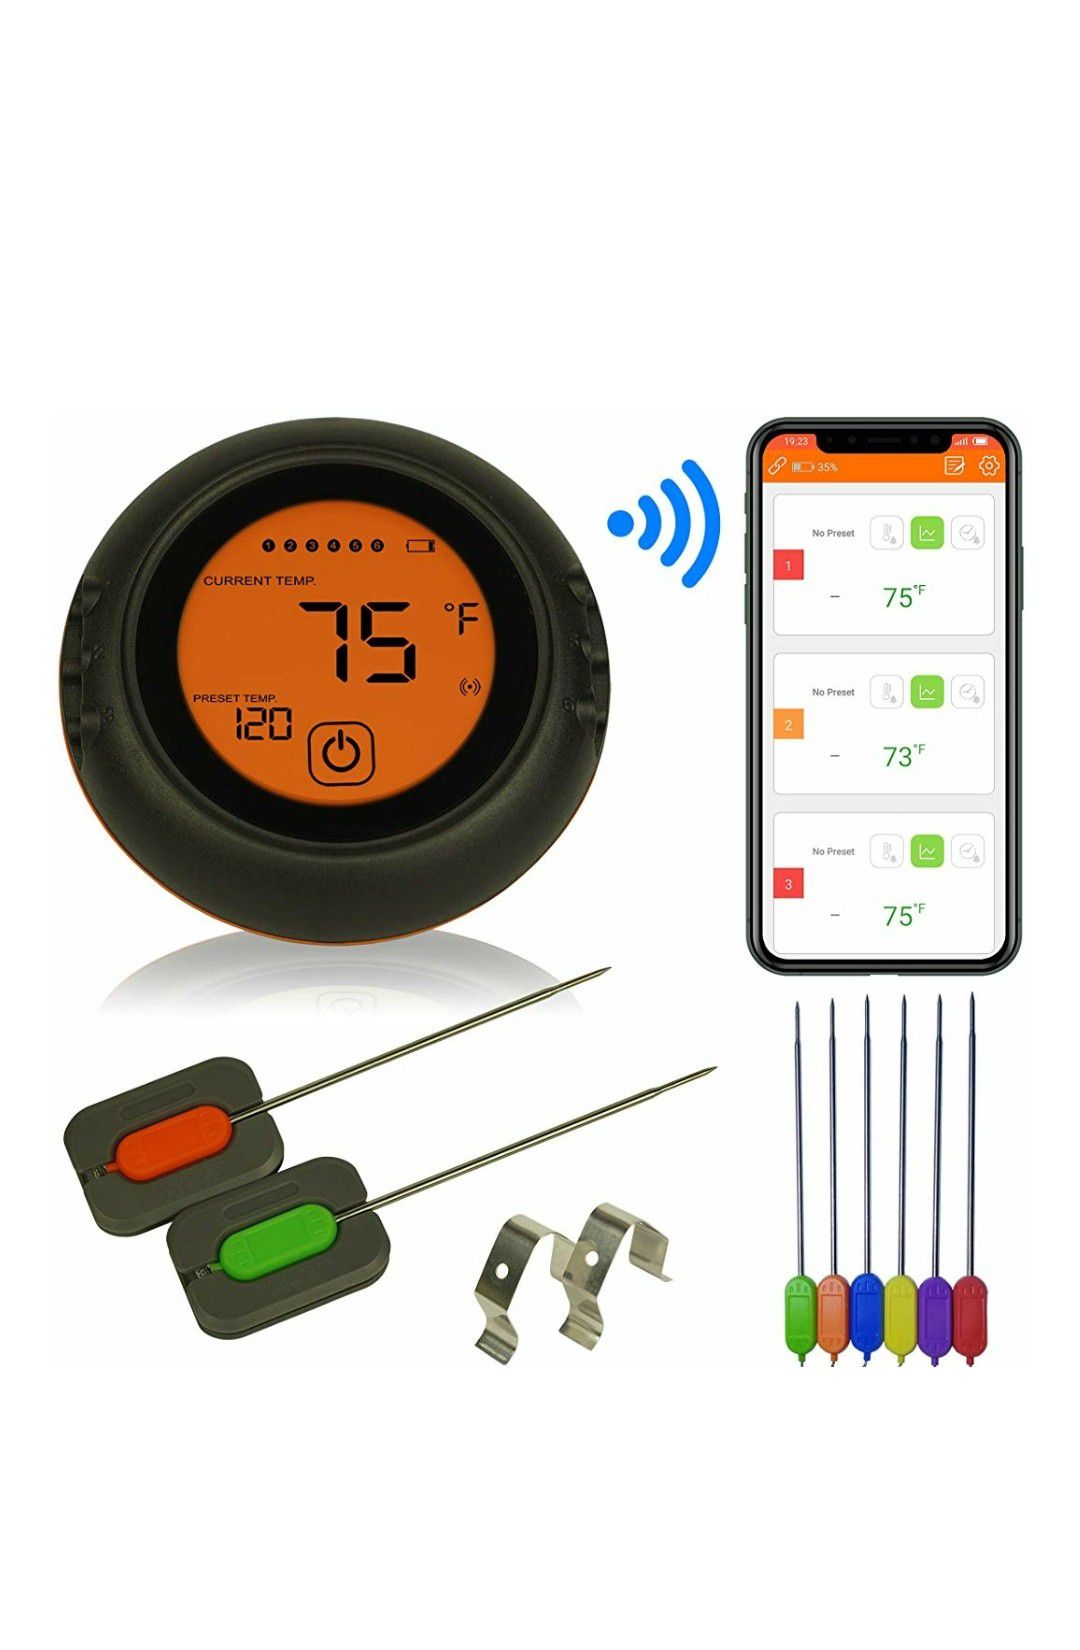 Wireless Meat Thermometer for Grilling, 6 Probes, Digital Cooking BBQ